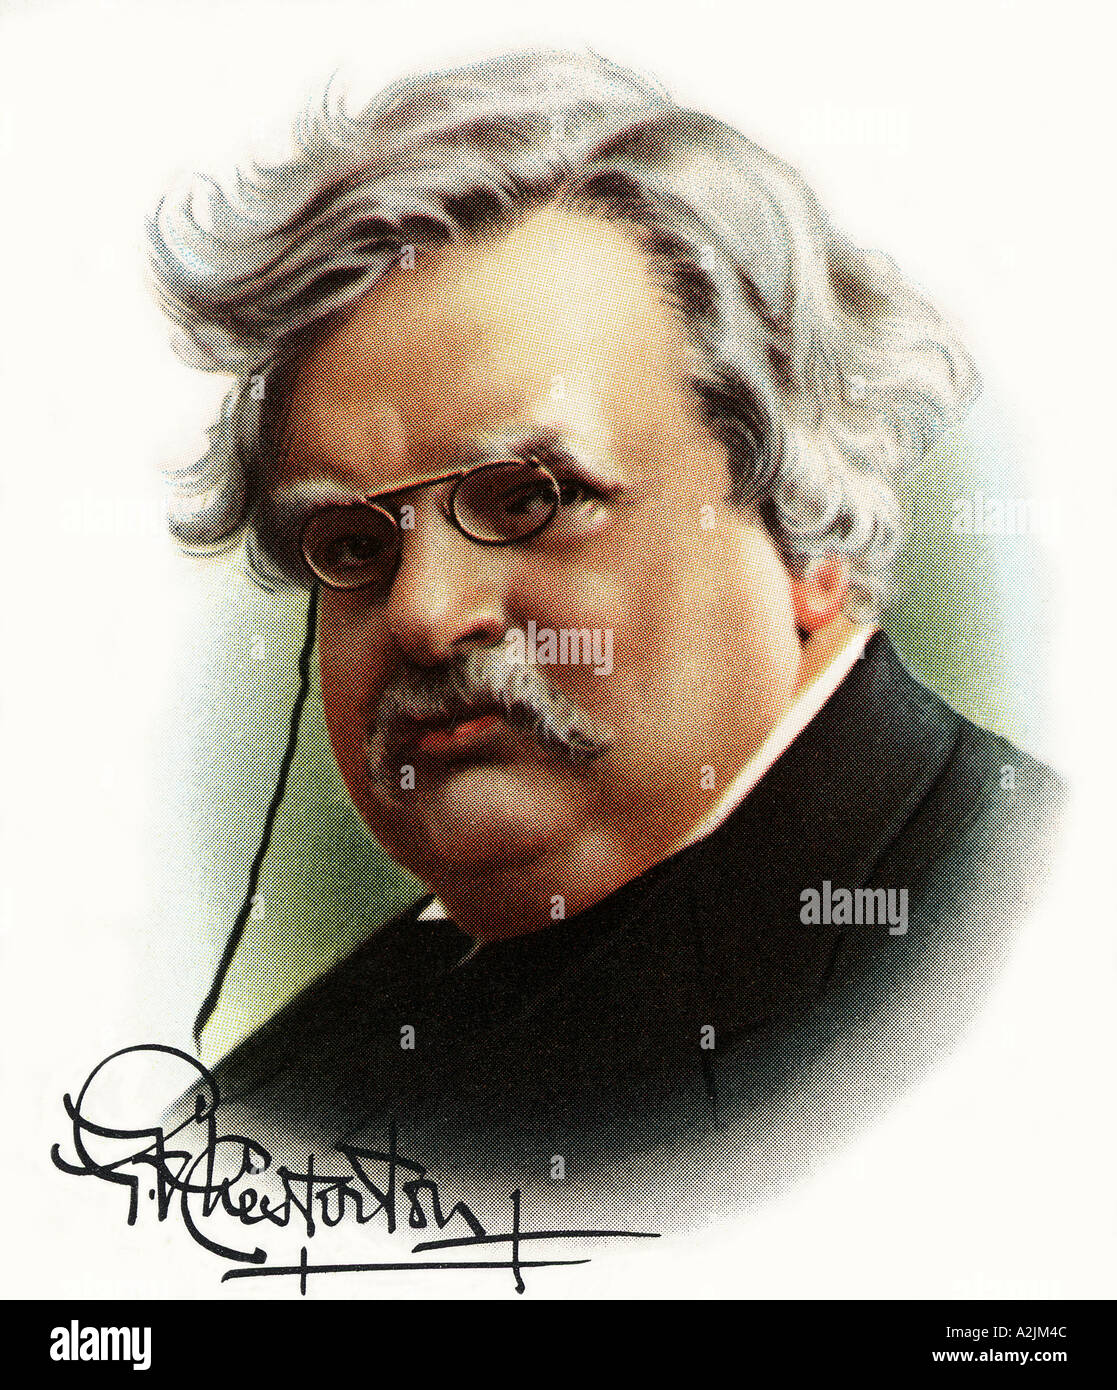 G K CHESTERTON English writer 1874 1936 as shown on a 1930s cigarette card togther with his signature Stock Photo